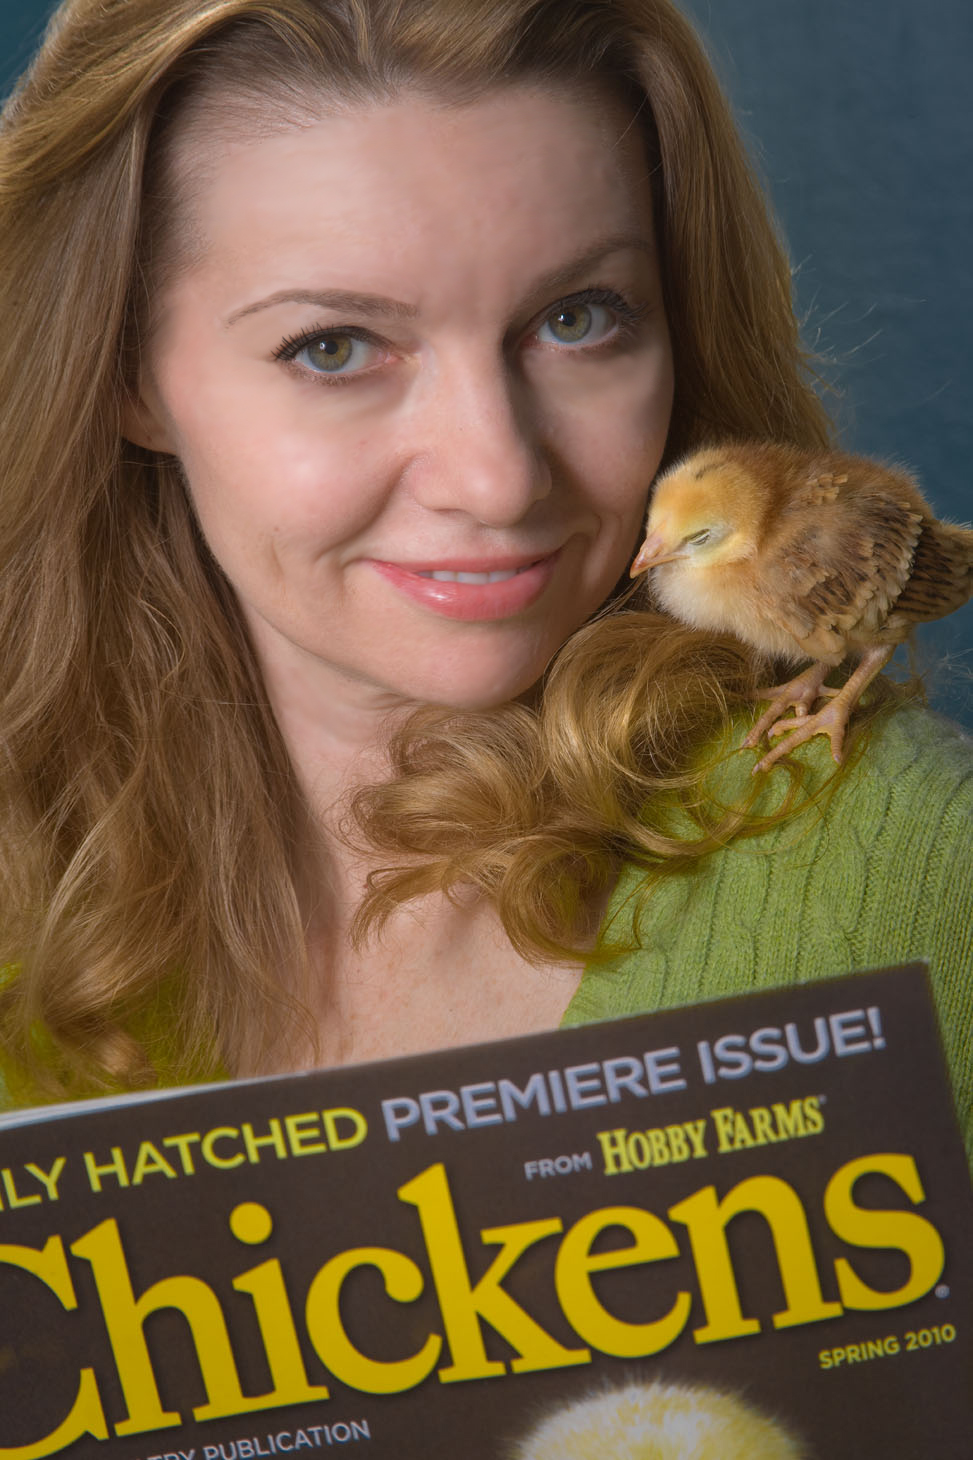 Promotional photo for Chickens Magazine